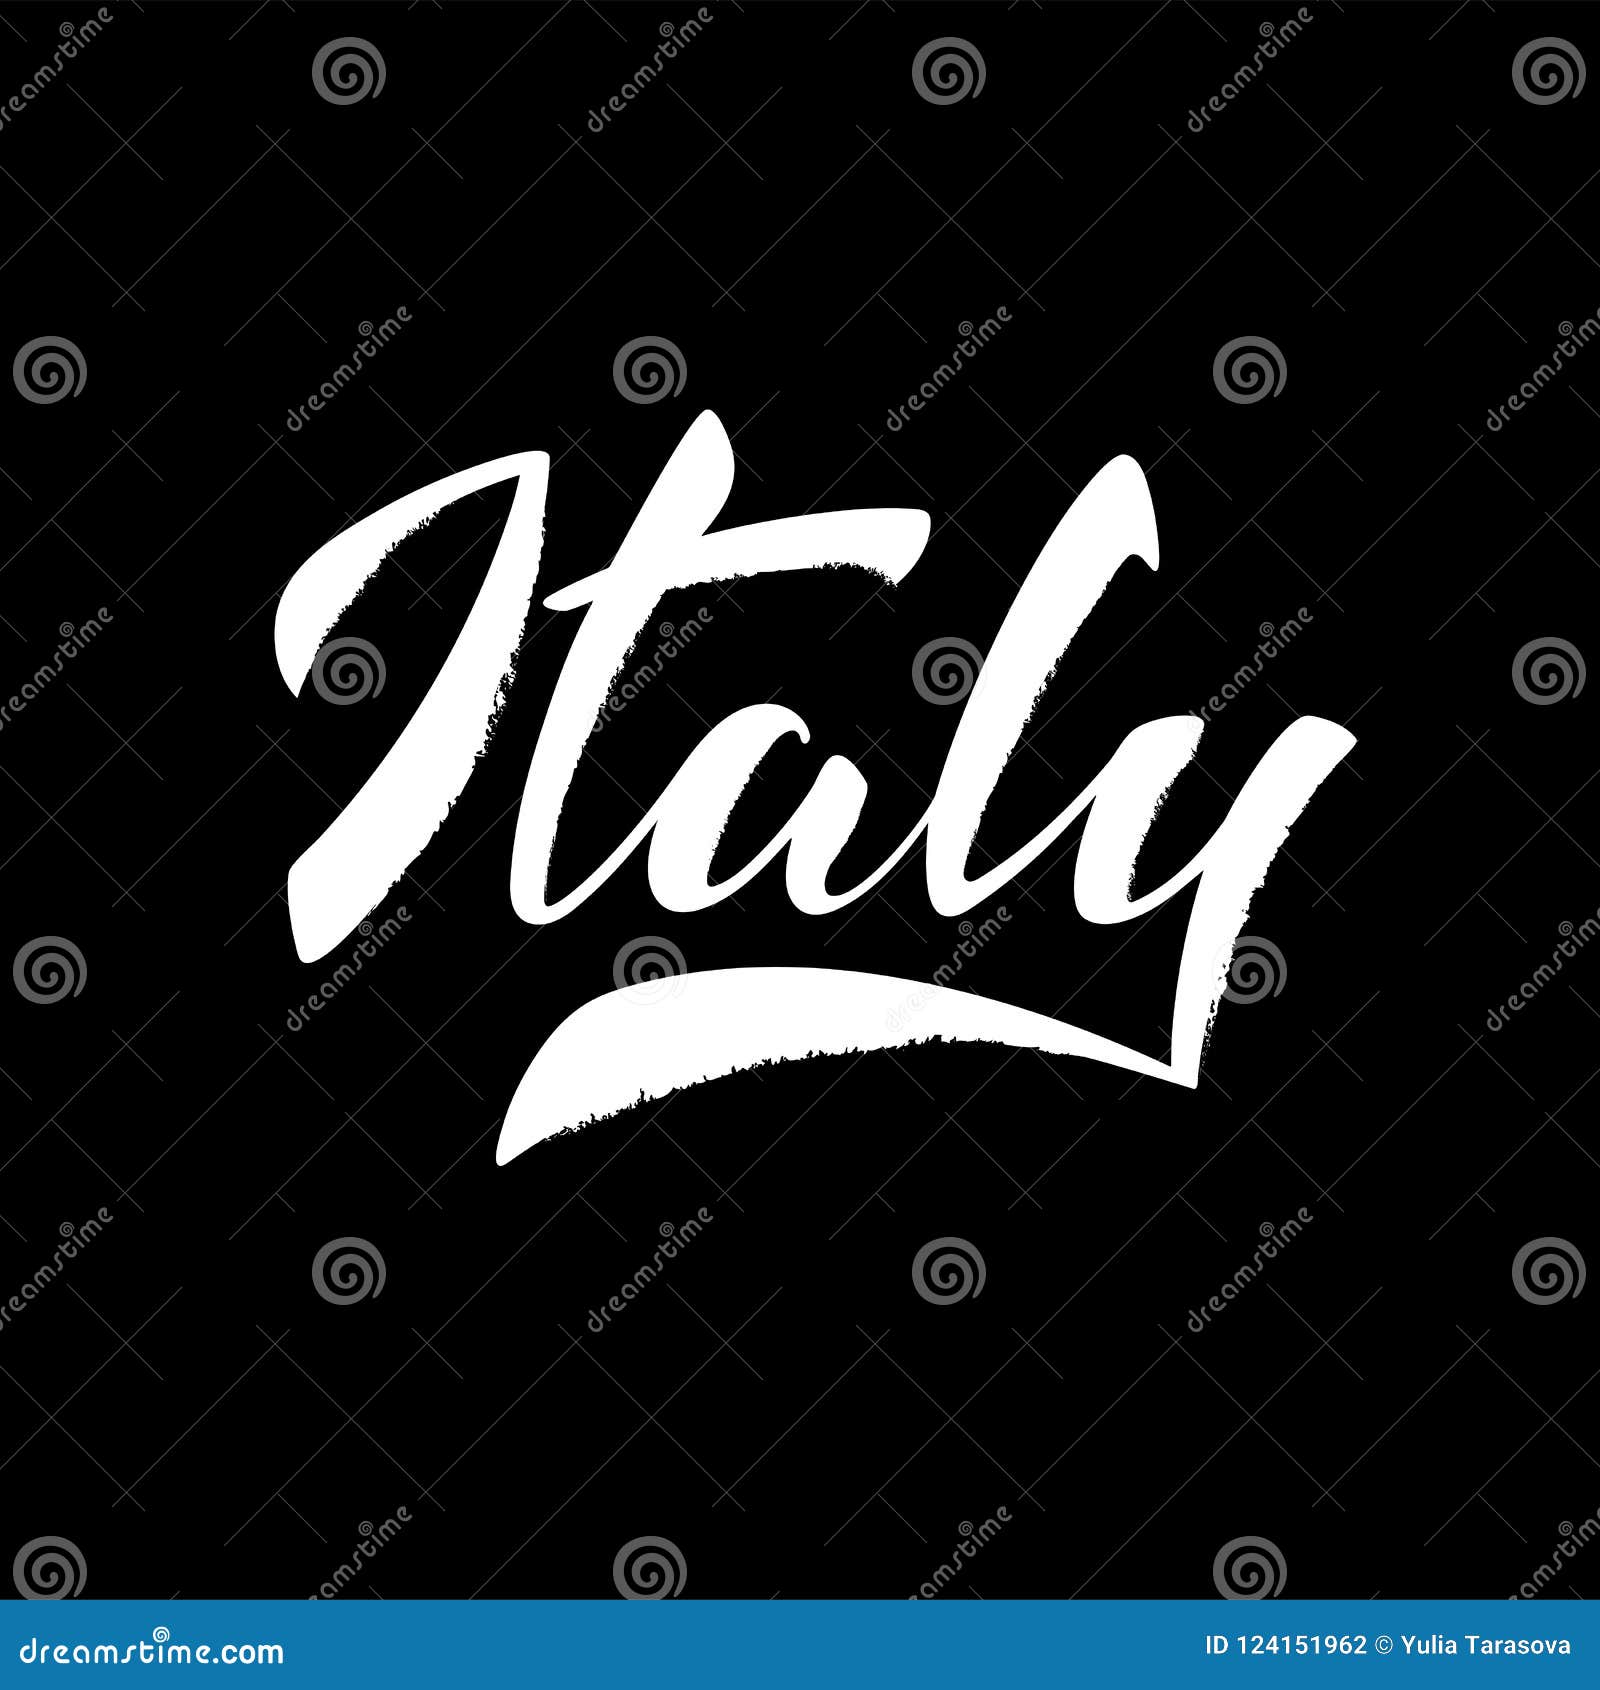 Italy stock vector. Illustration of flag, calligraphic - 124151962